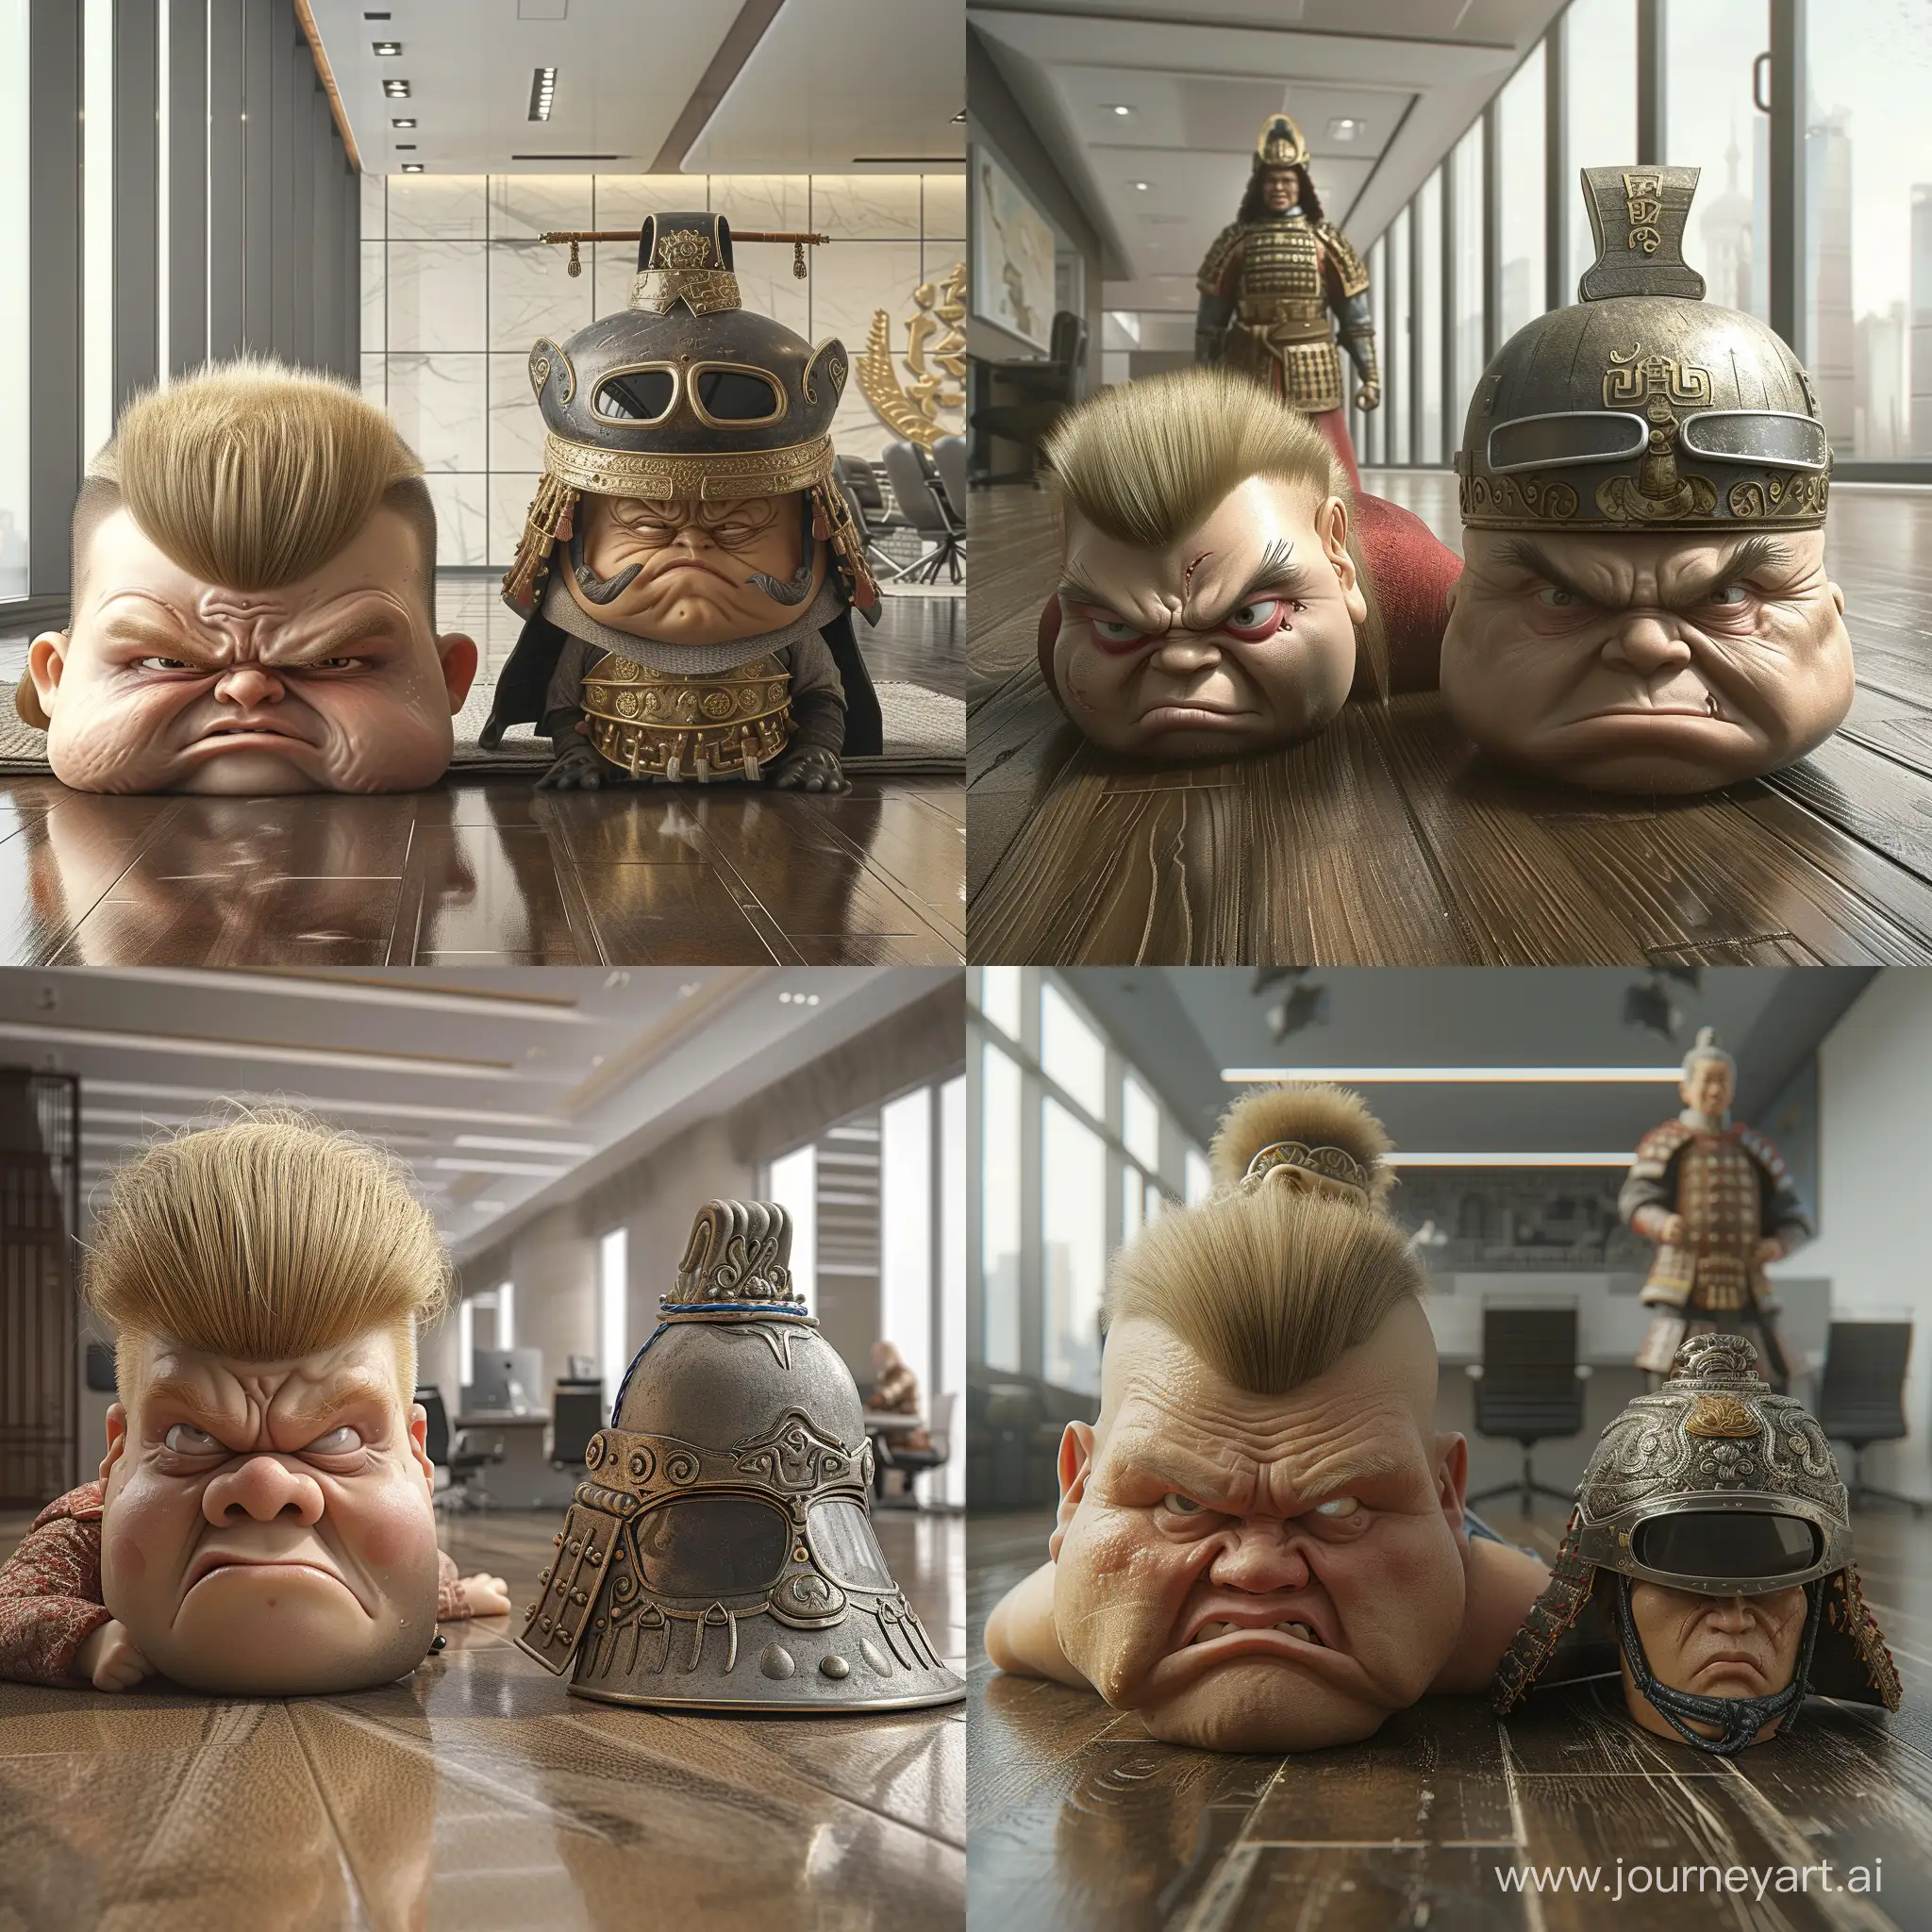 Realistic. Angry and gawky looking guy with bulbous cheeks and geeky blonde fringe lying on the floor. Medieval Chinese solider with visor helmet standing next to him. Background is a sleek corporate office.